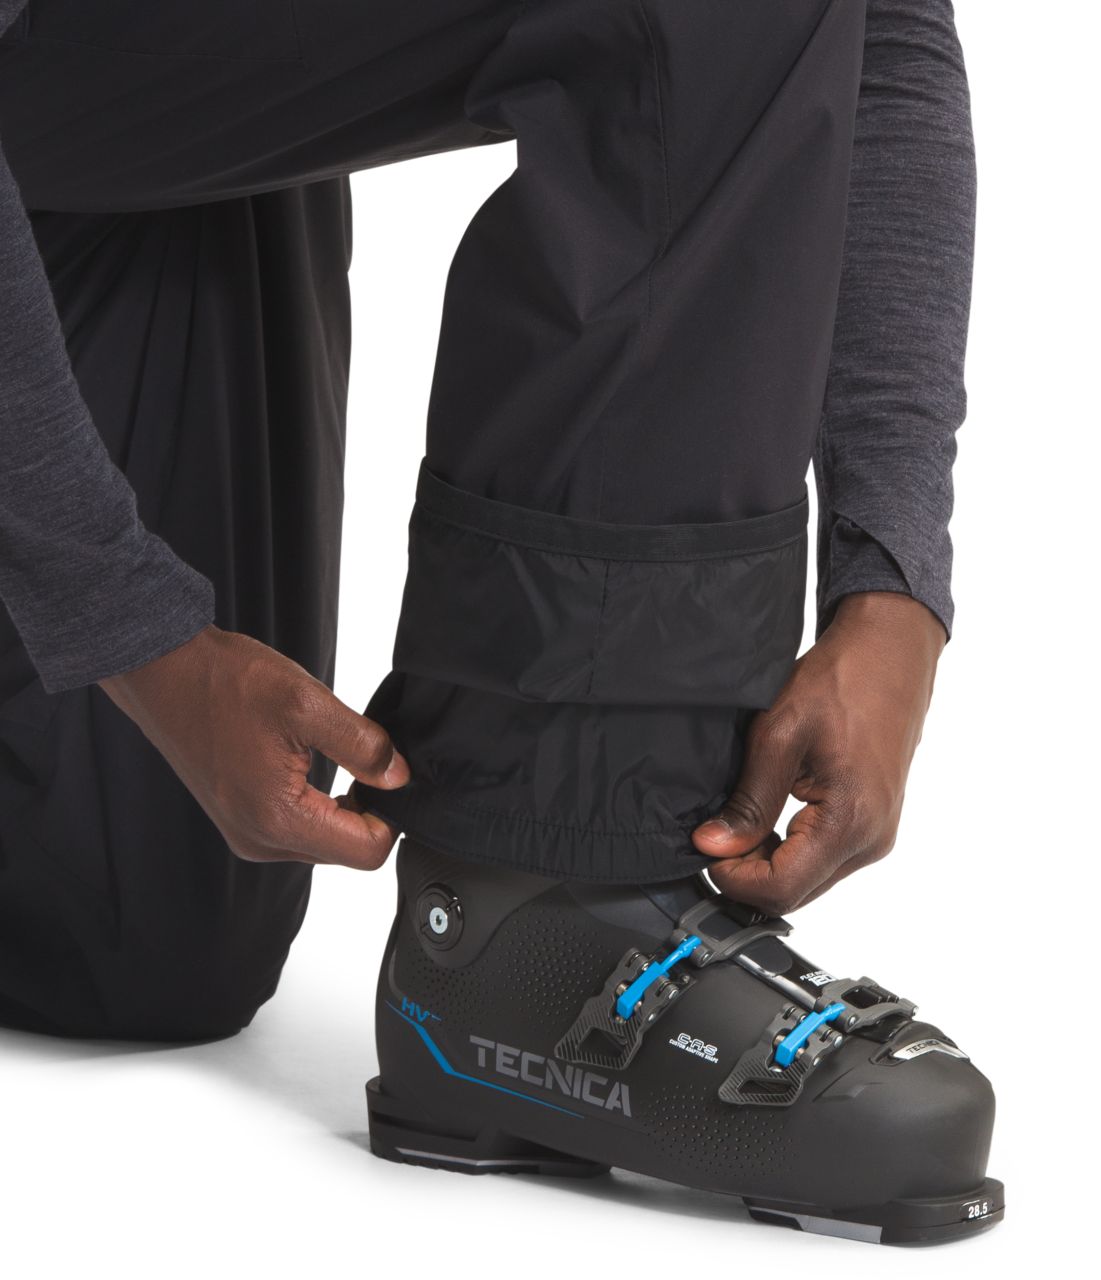 The North Face Freedom Pant - Men's - Men